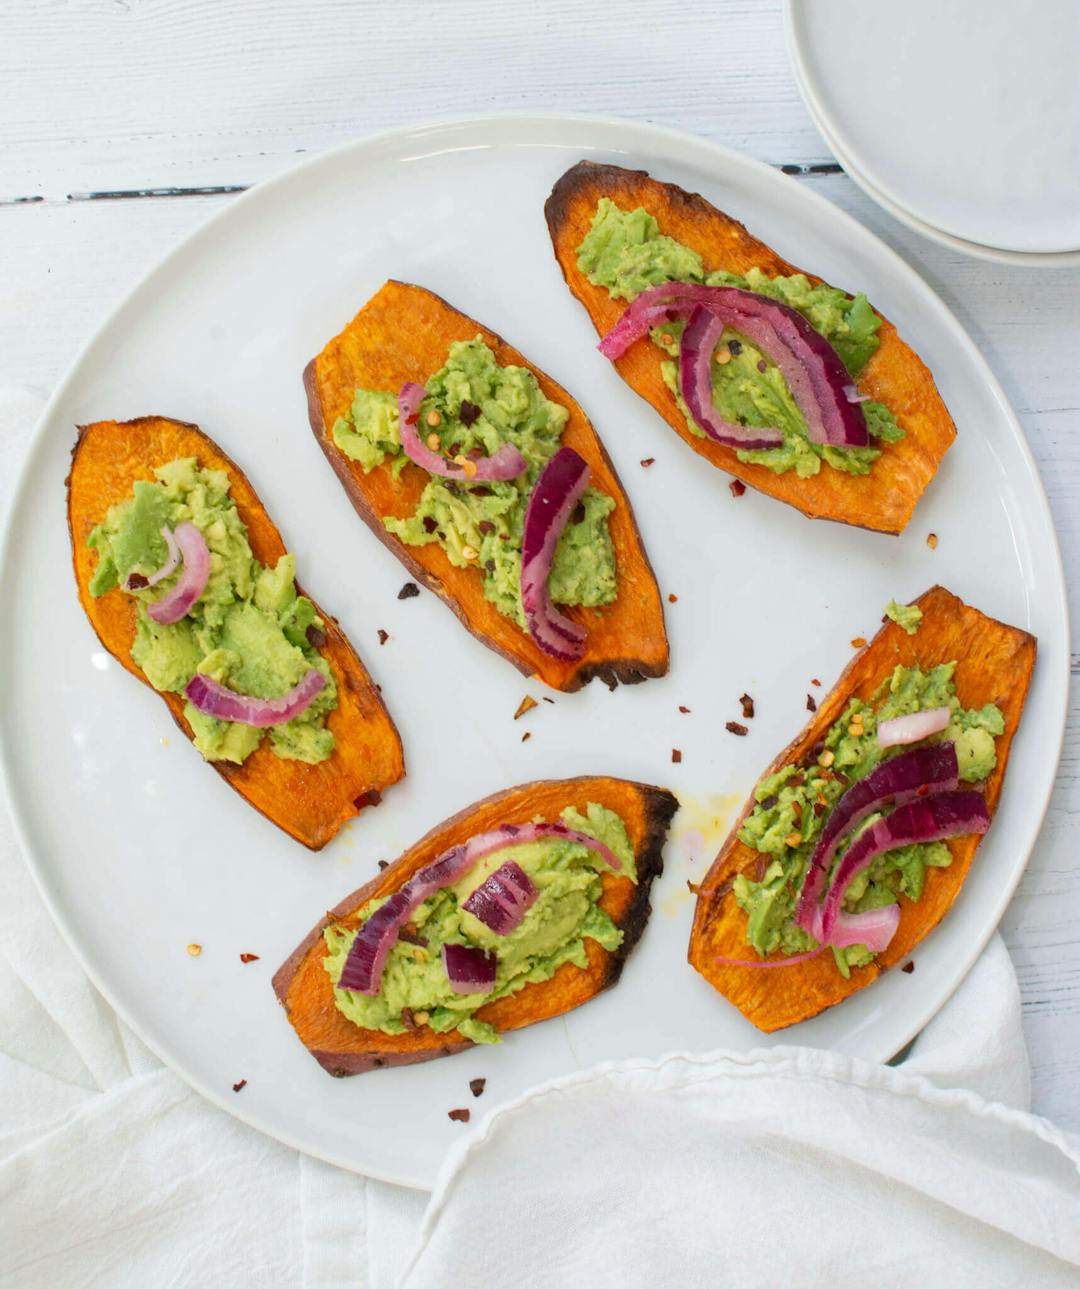 Healthy Baked Sweet Potato Slices with Guacamole